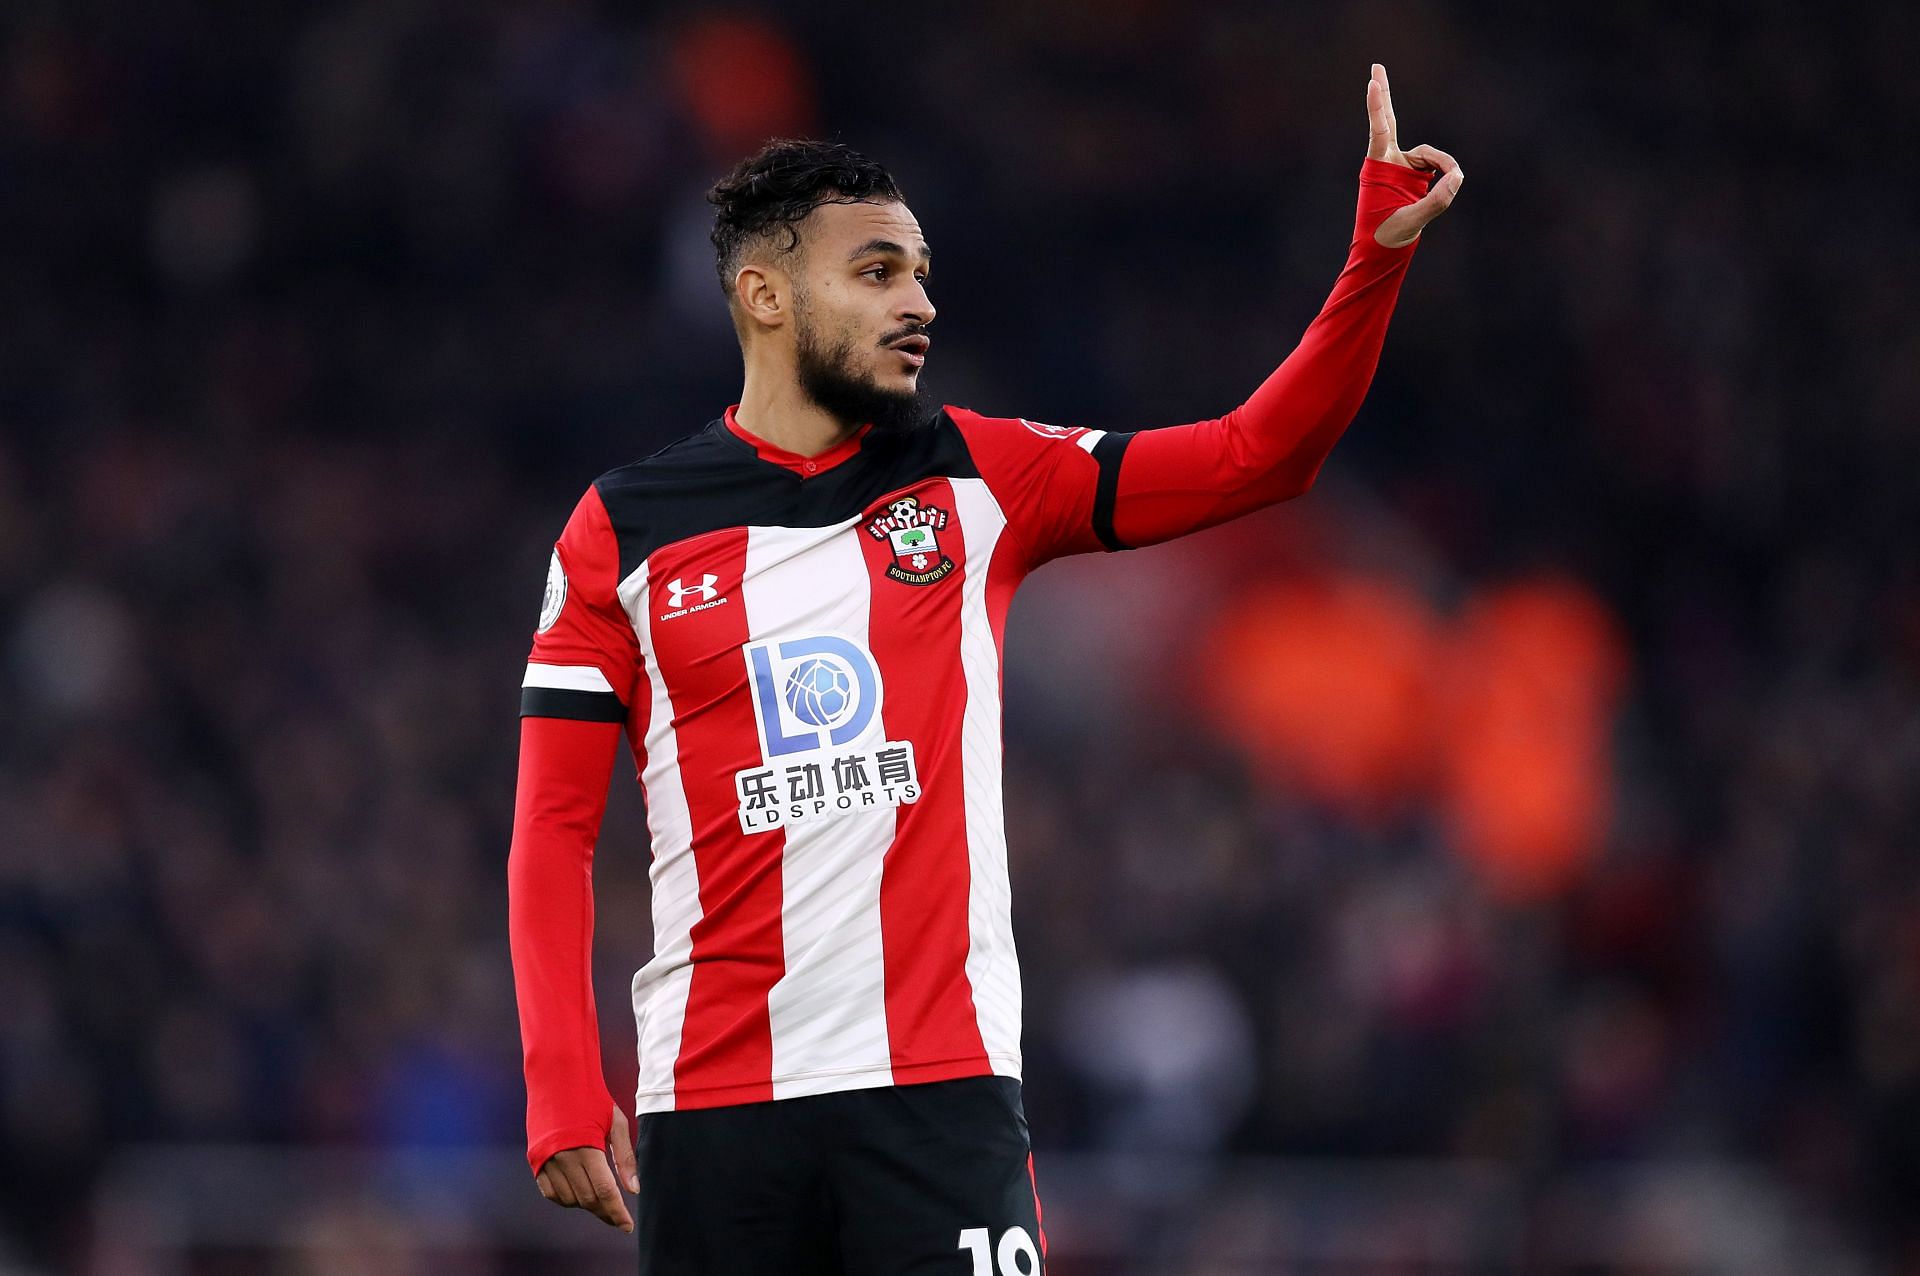 Sofiane Boufal returned to his former club SCO Angers from Southampton in October 2020.